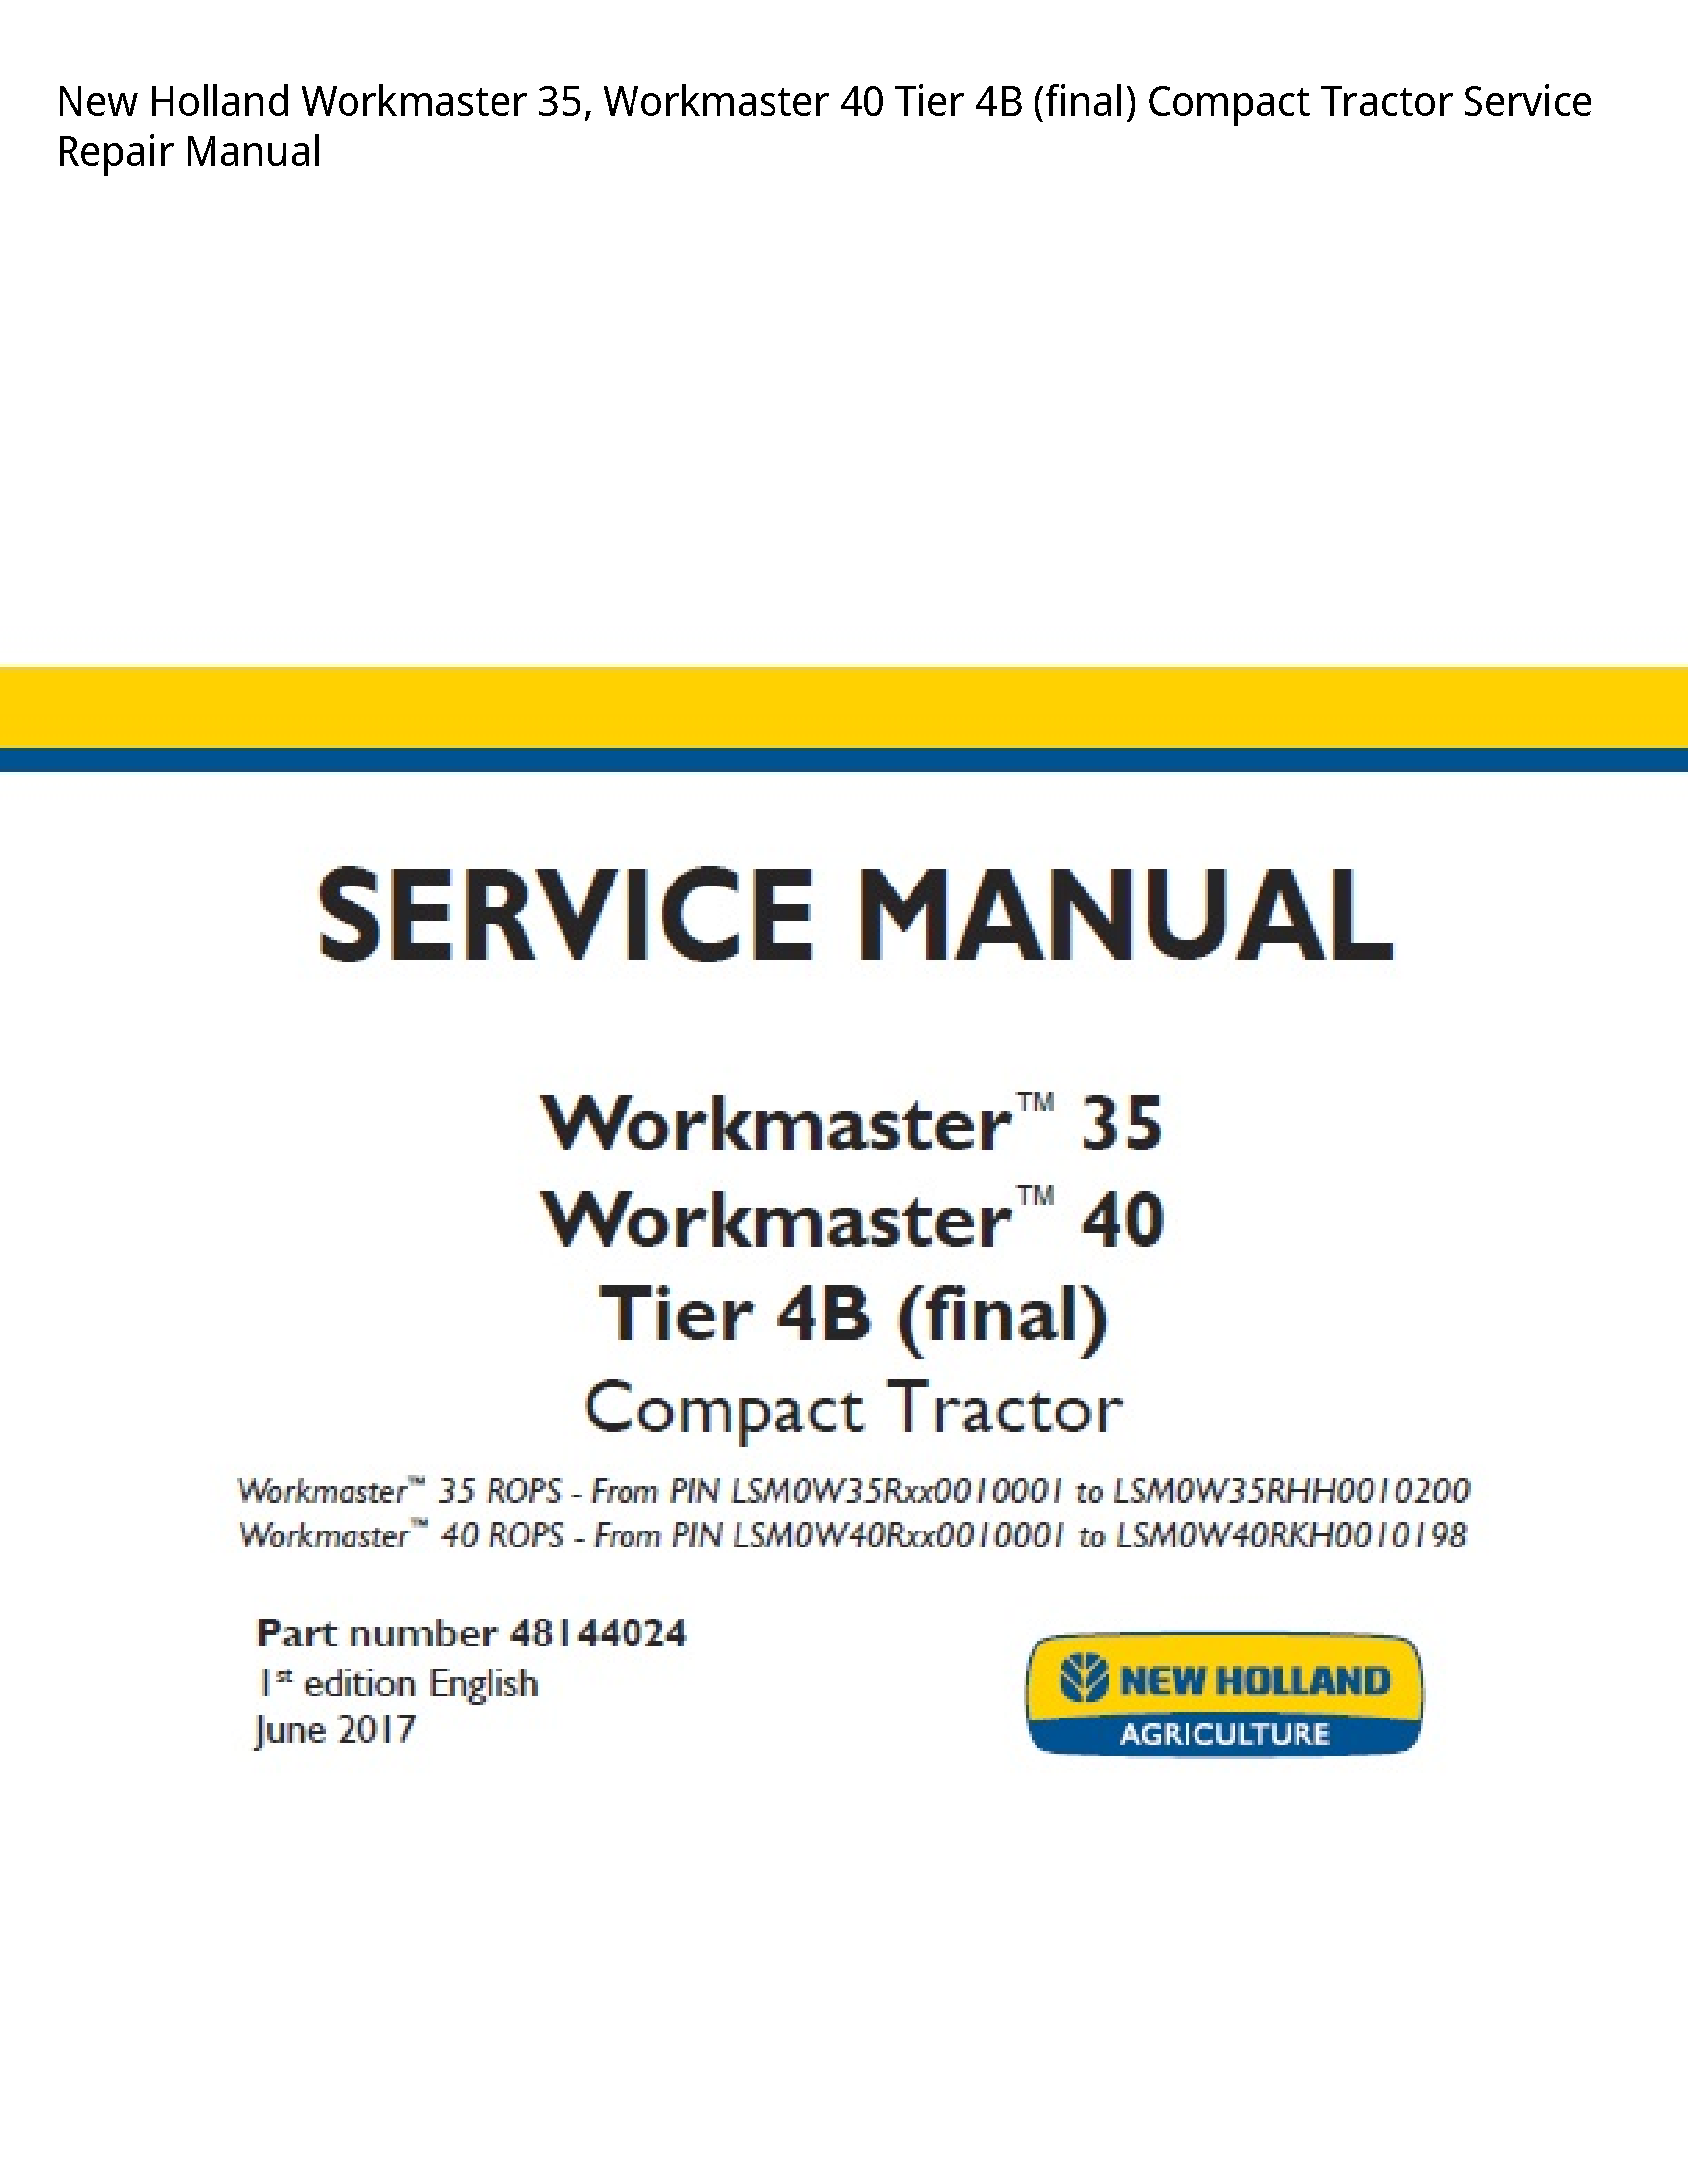 New Holland 35 Workmaster Workmaster Tier (final) Compact Tractor manual